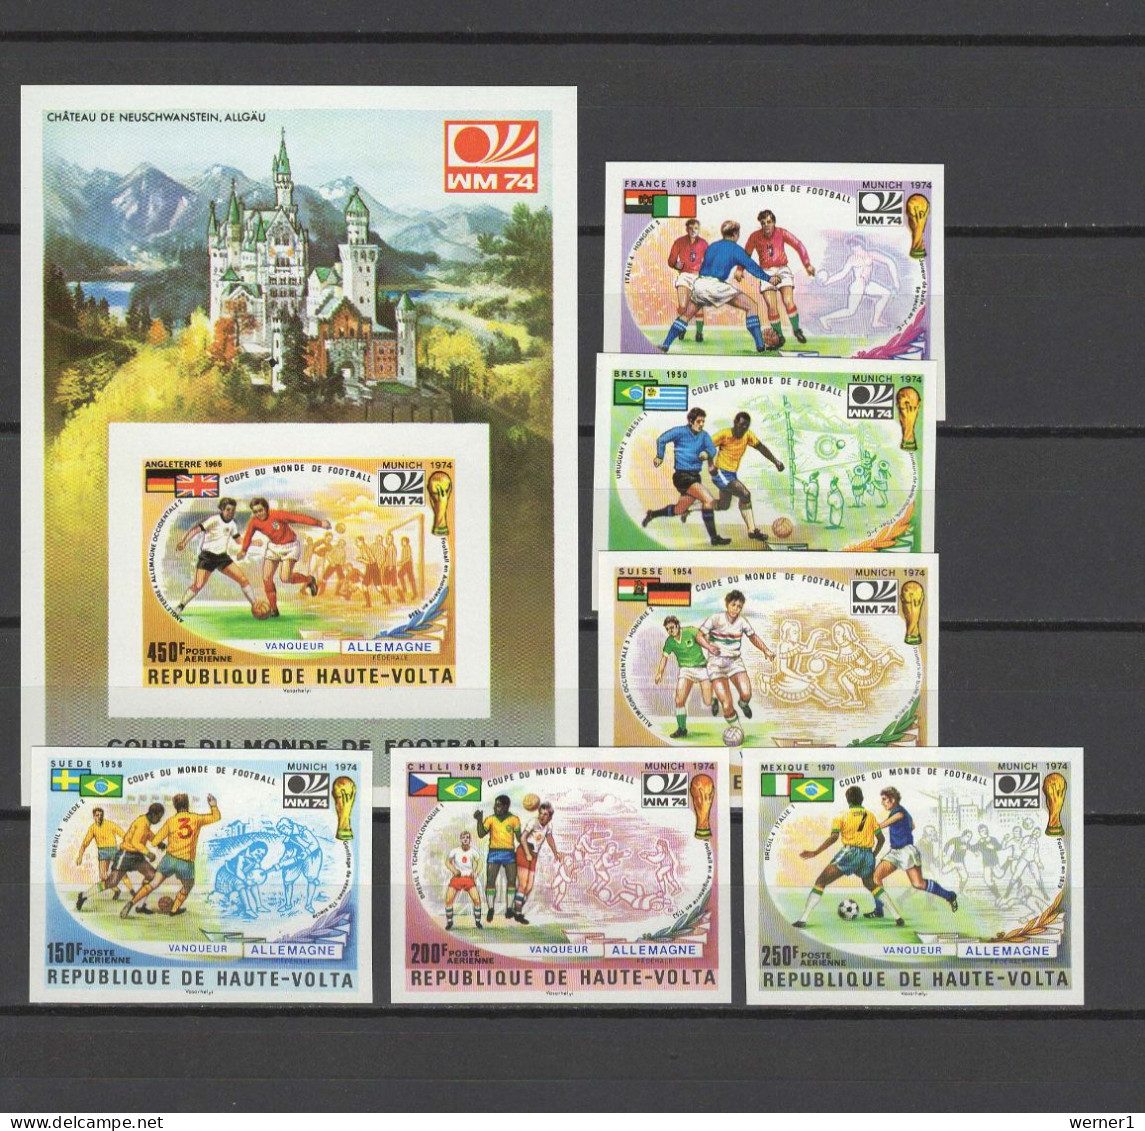 Burkina Faso (Upper Volta) 1974 Football Soccer World Cup Set Of 6 + S/s Imperf. MNH -scarce- - 1974 – West Germany